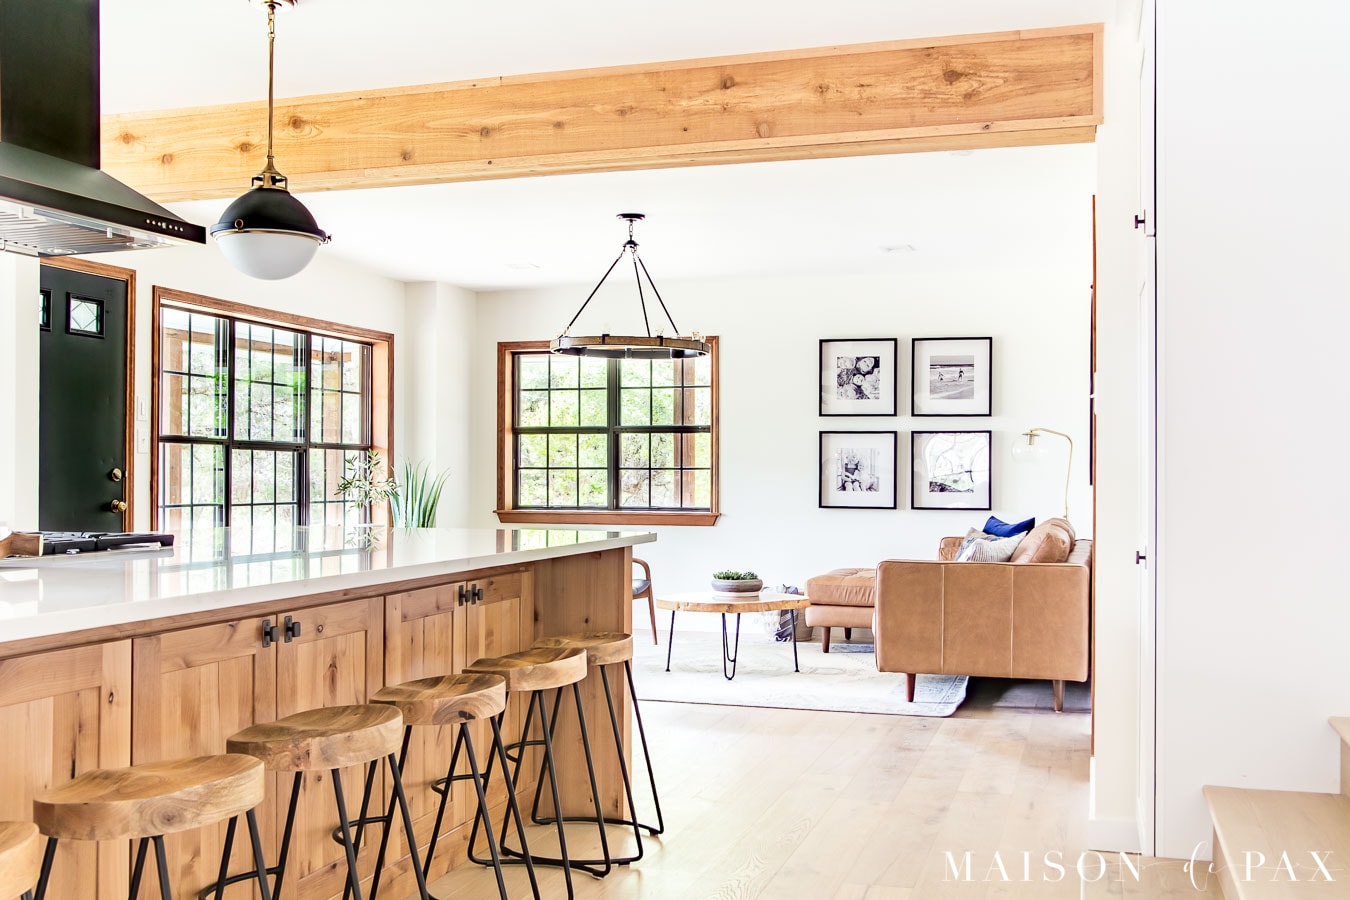 open concept kitchen with big island and rustic beams | Maison de Pax